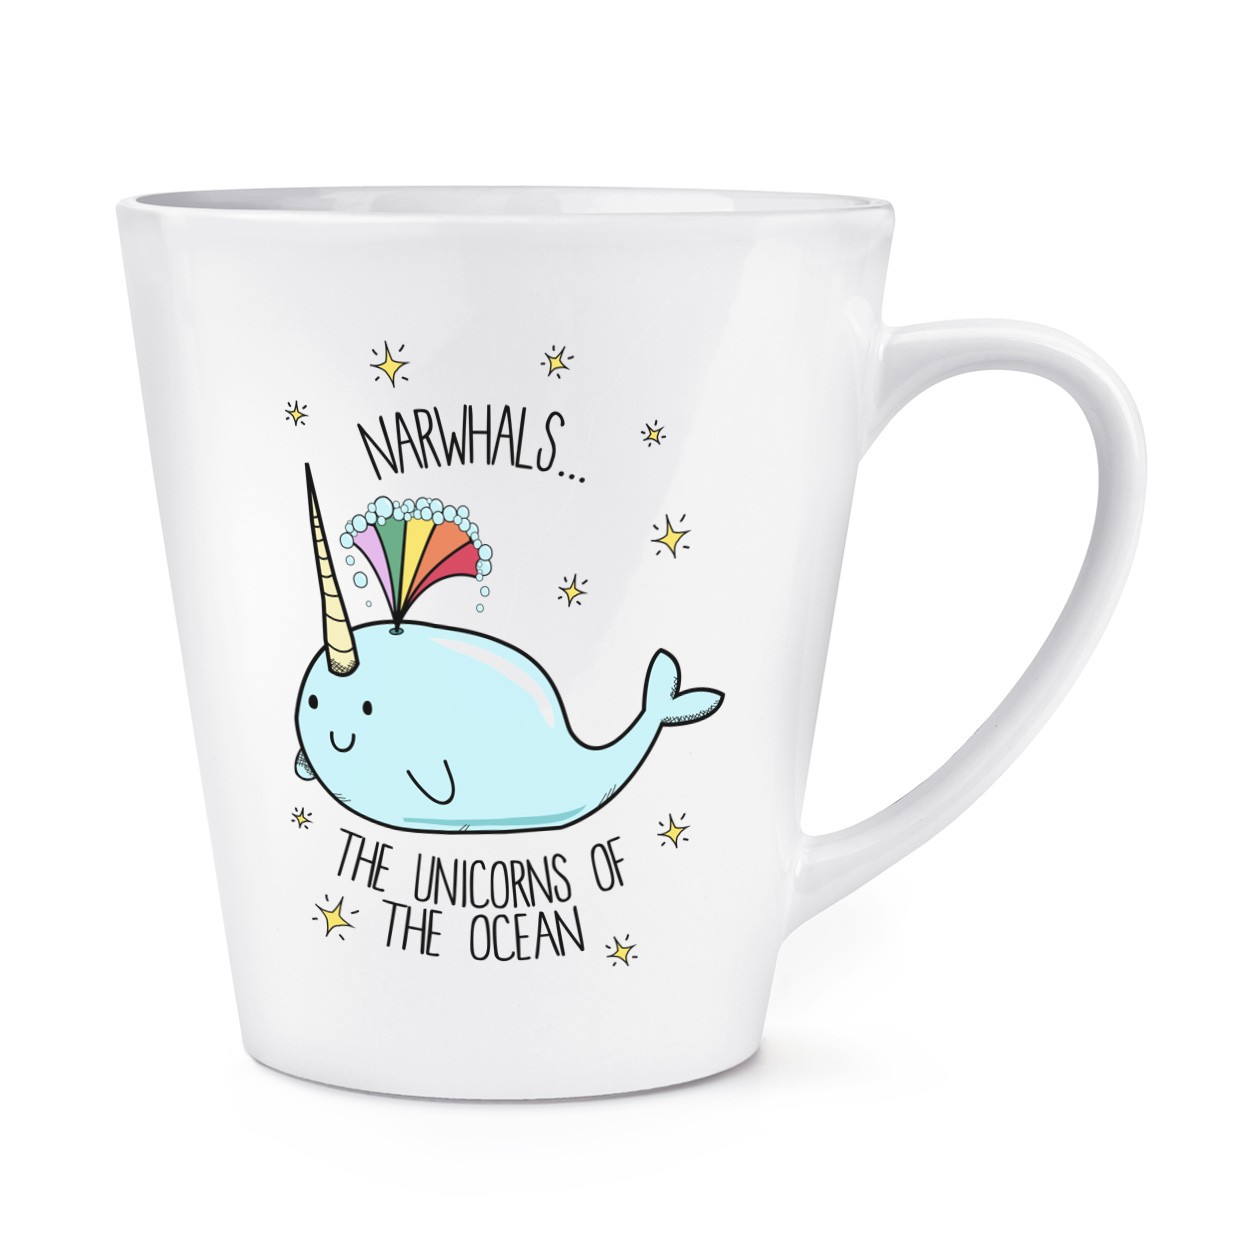 Narwhals The Unicorns Of The Ocean 12oz Latte Mug Cup